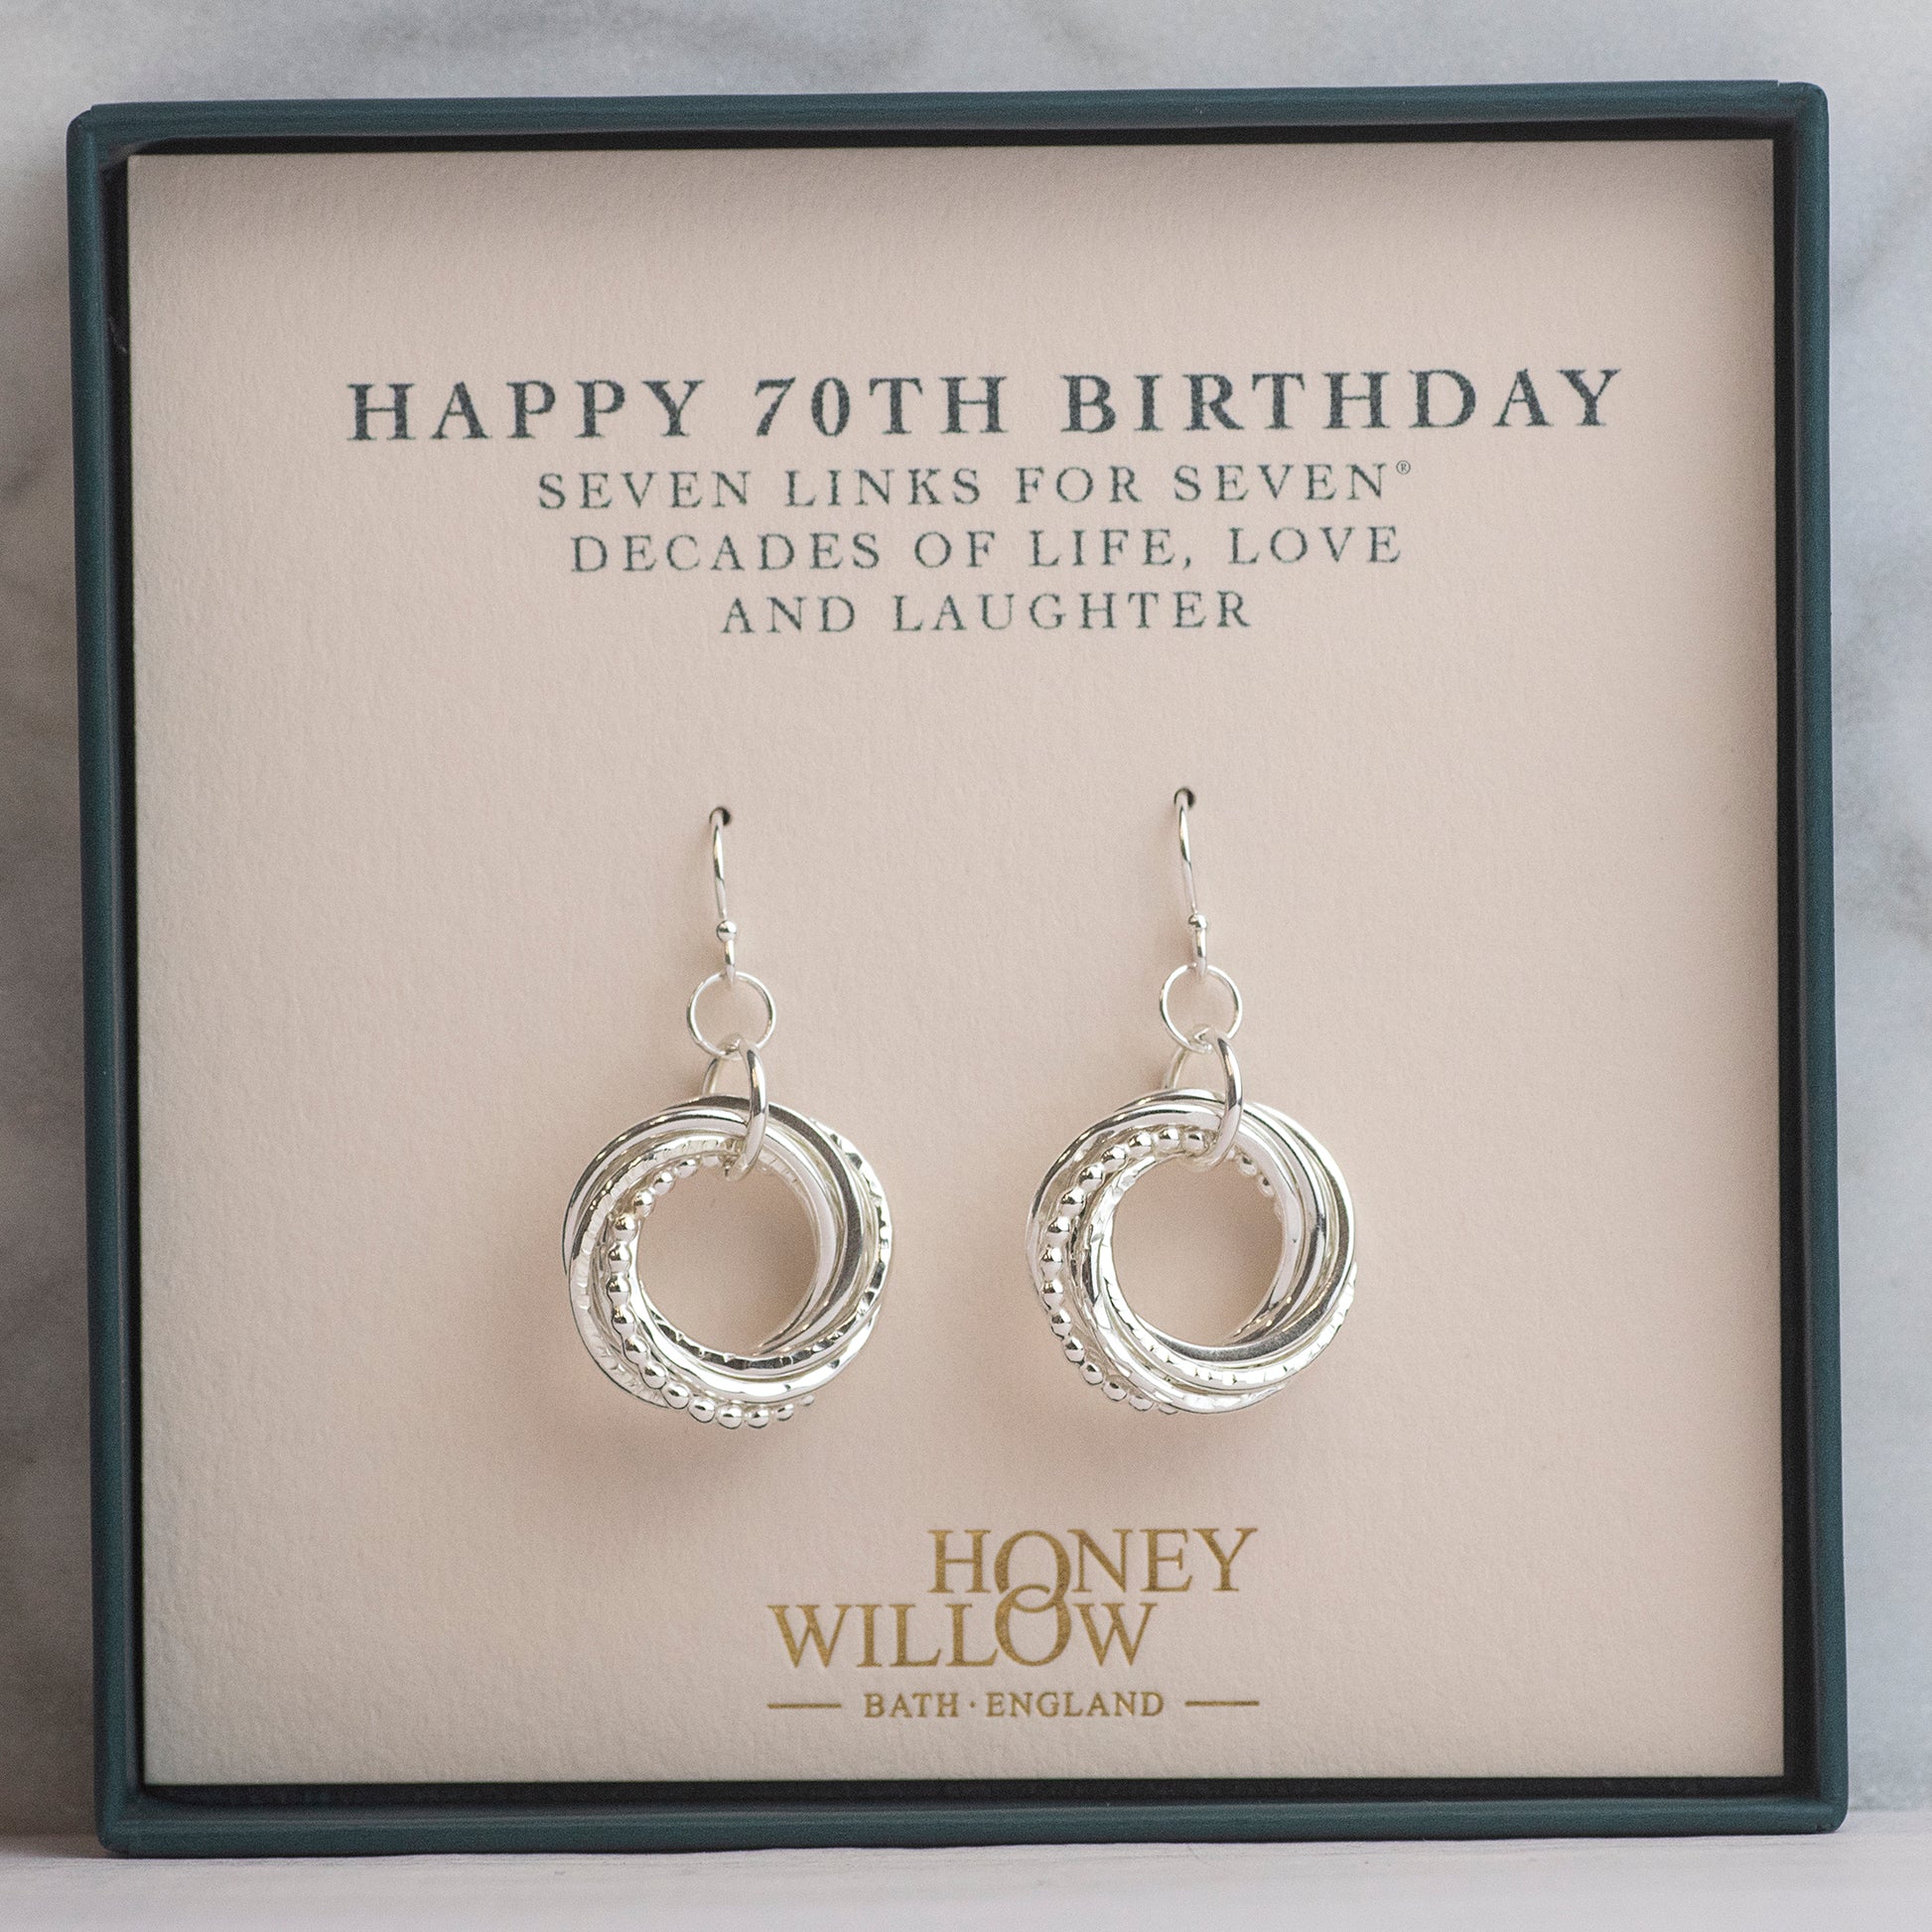 70th Birthday Earrings - 7 Links for 7 Decades - Silver